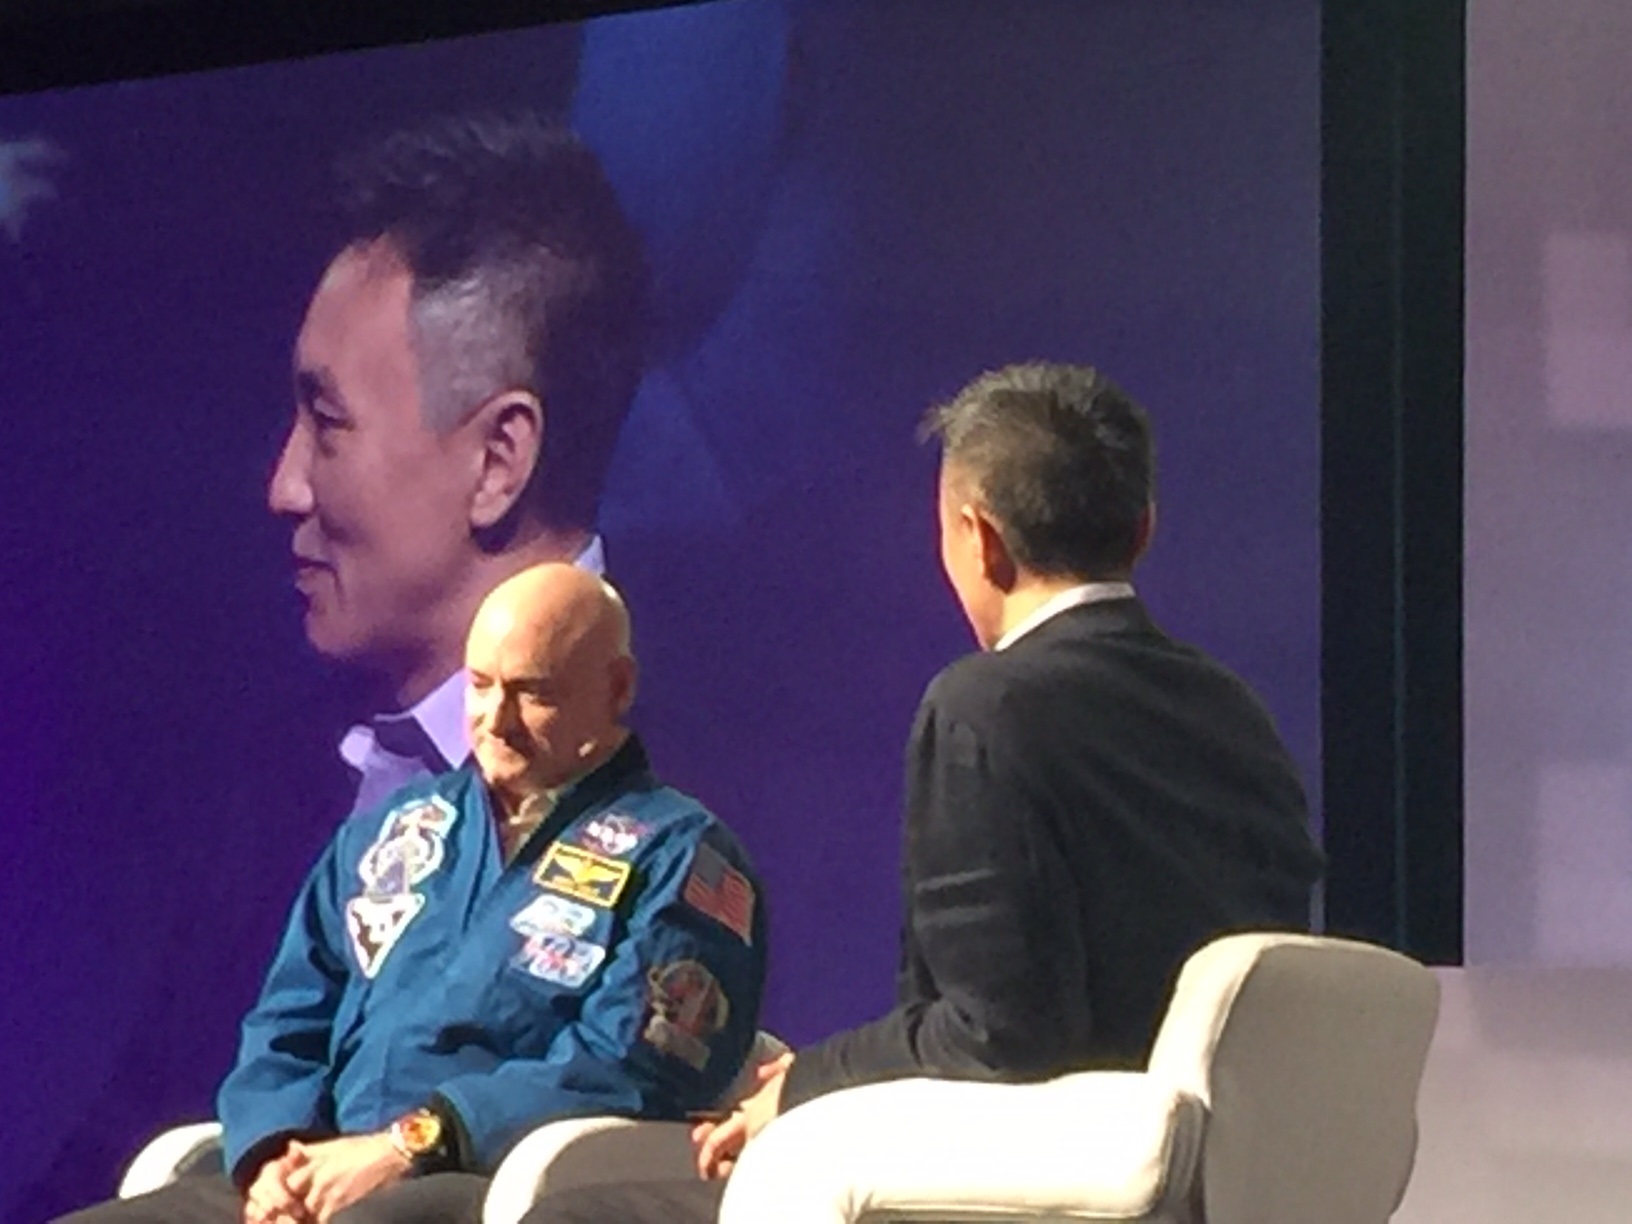 9 Things I Learned from Scott Kelly, American Astronaut